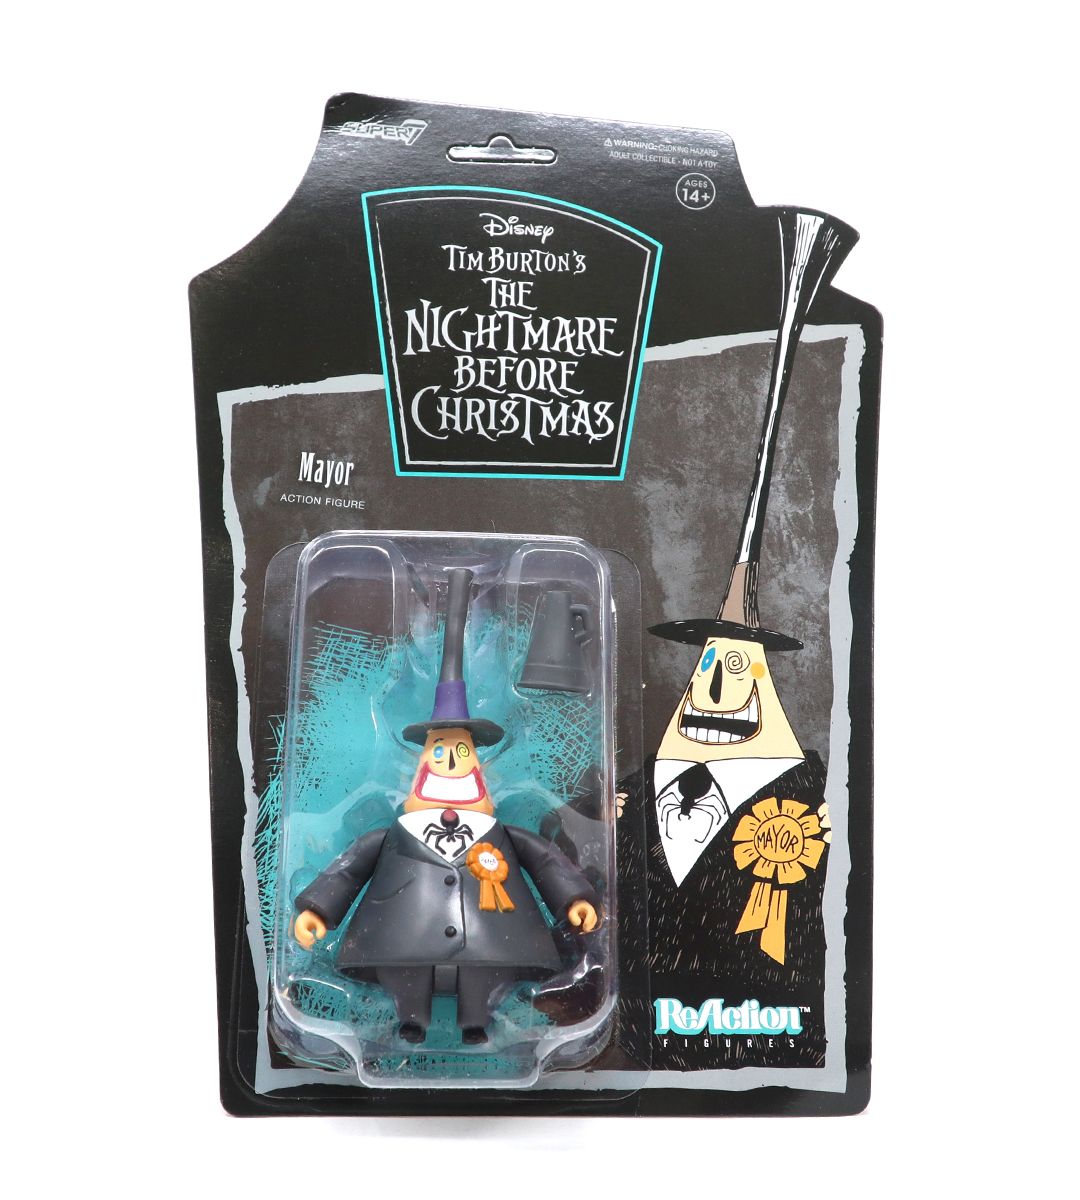 Le Maire - Tim Burton's The Nightmare Before Christmas - ReAction figure